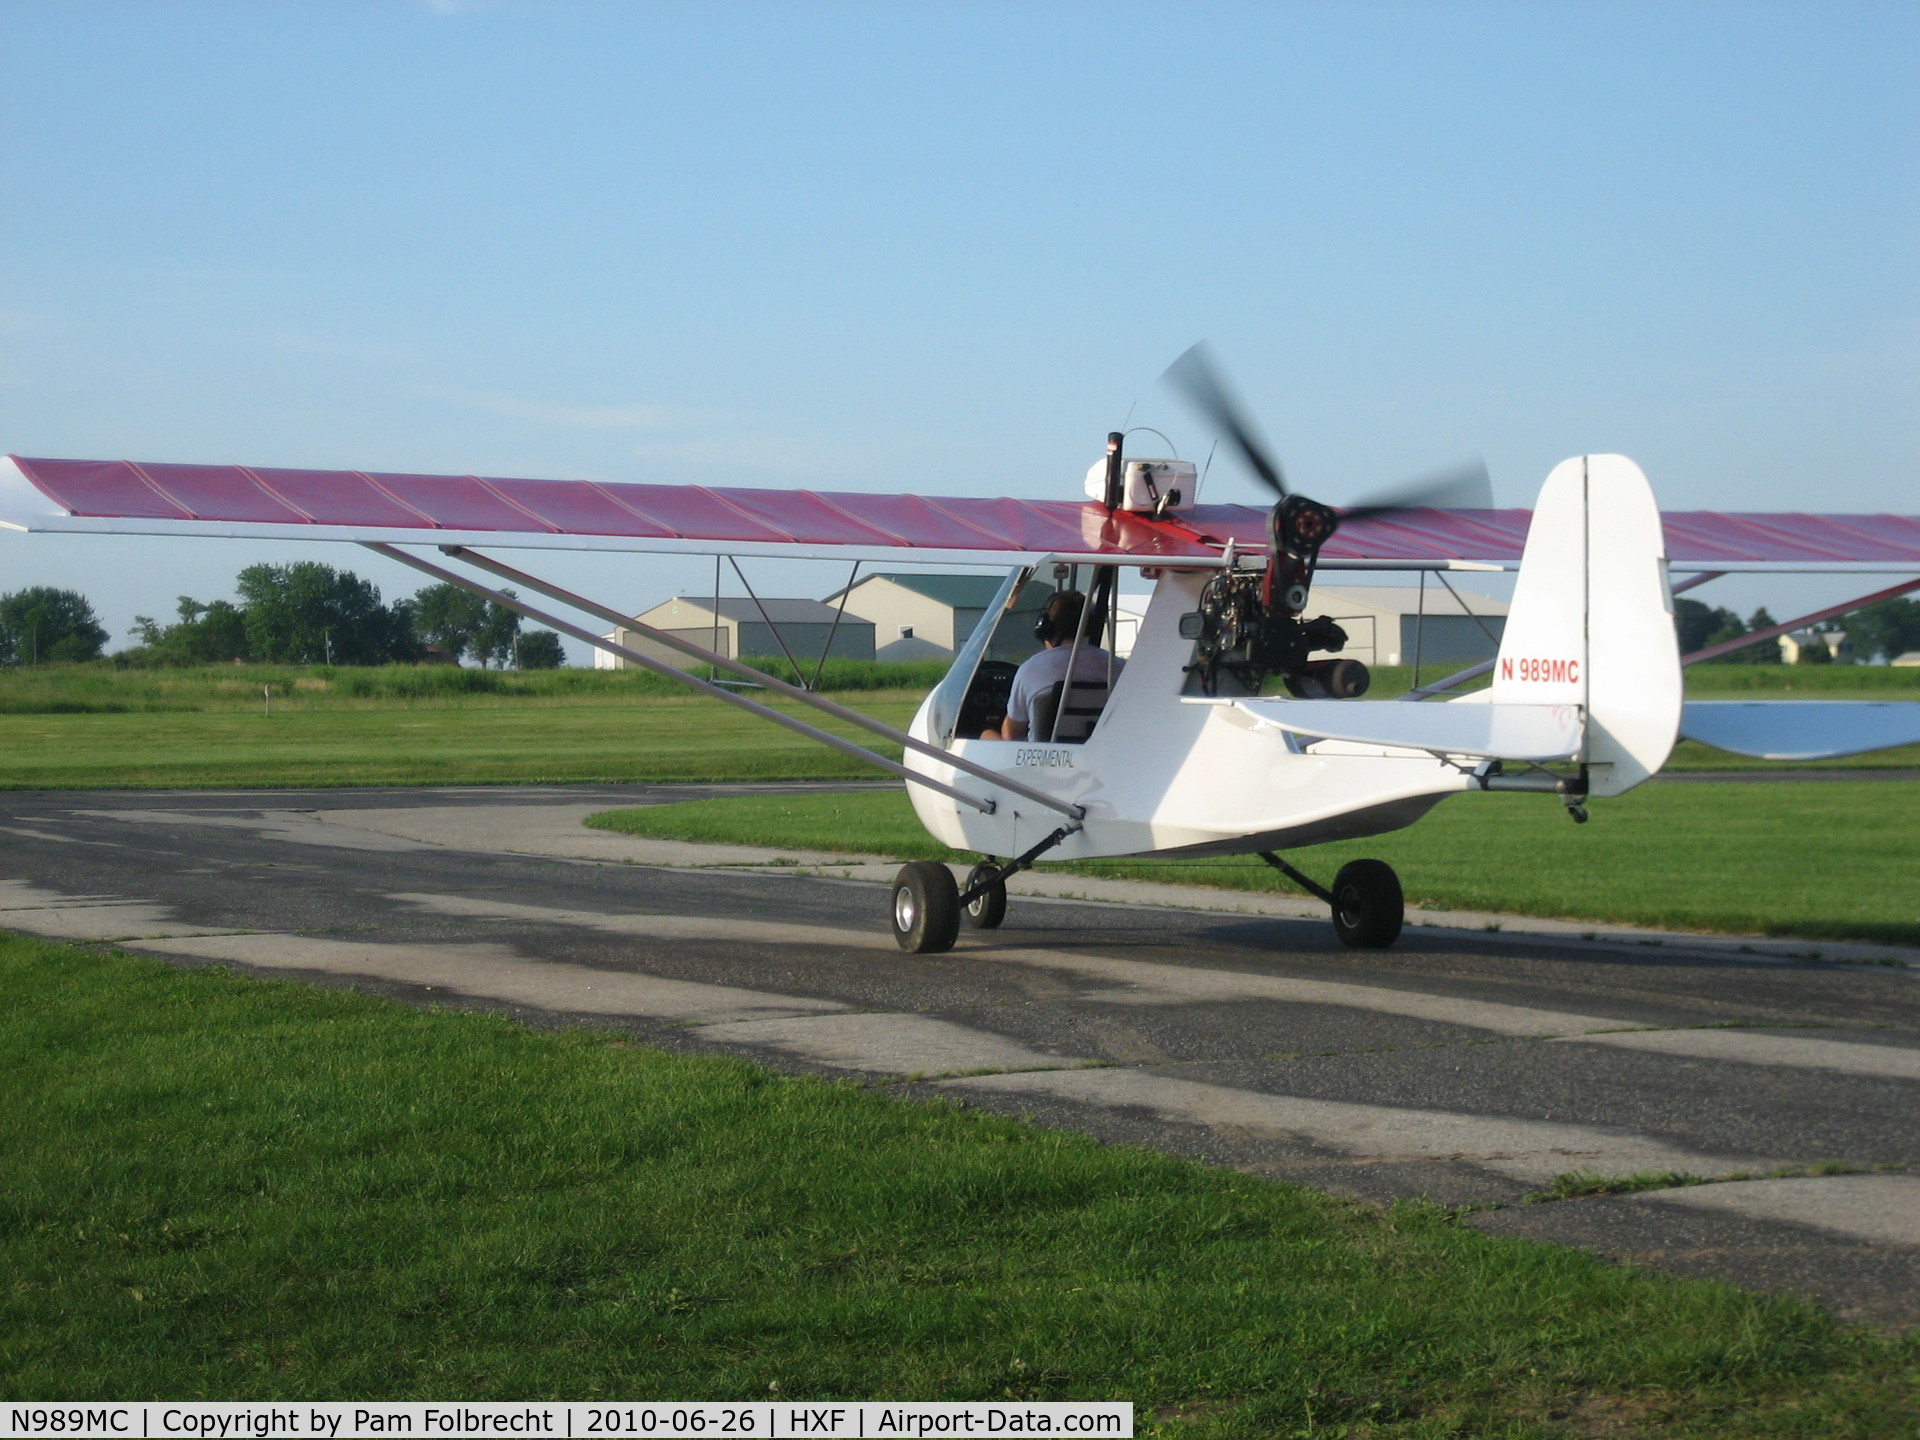 N989MC, 2006 Quad City Challenger II C/N CH2-0403-2317, Owner Paul Folbrecht taxiing to Runway 11 @ HXF